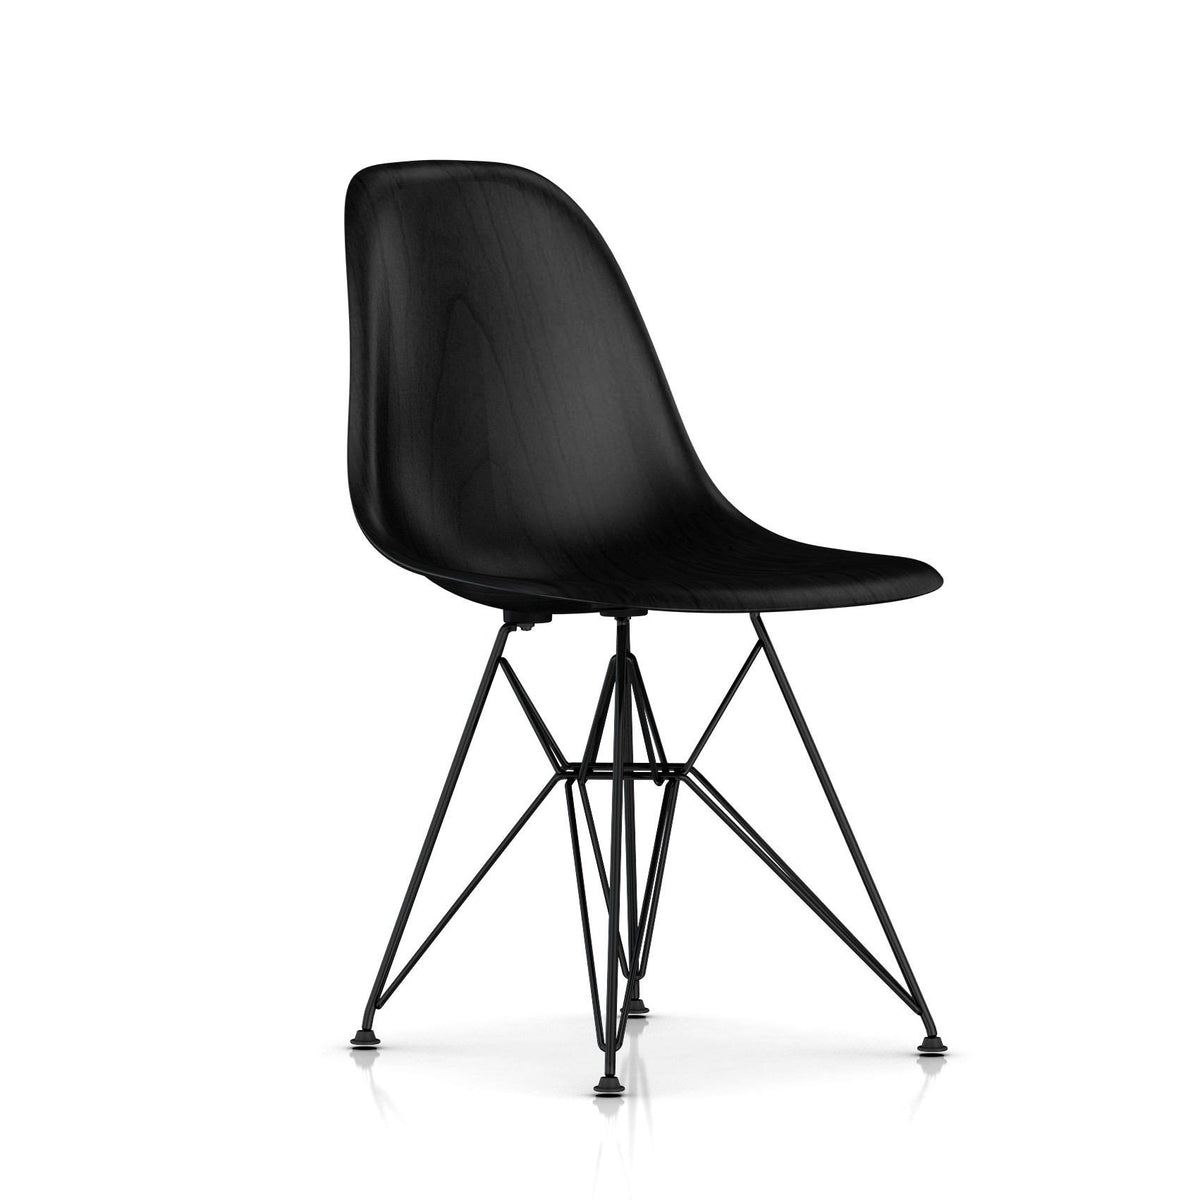 https://cdn.shopify.com/s/files/1/0202/3990/products/eames_molded_wood_side_chair_-_wire_base_15_1200x.jpg?v=1550844815